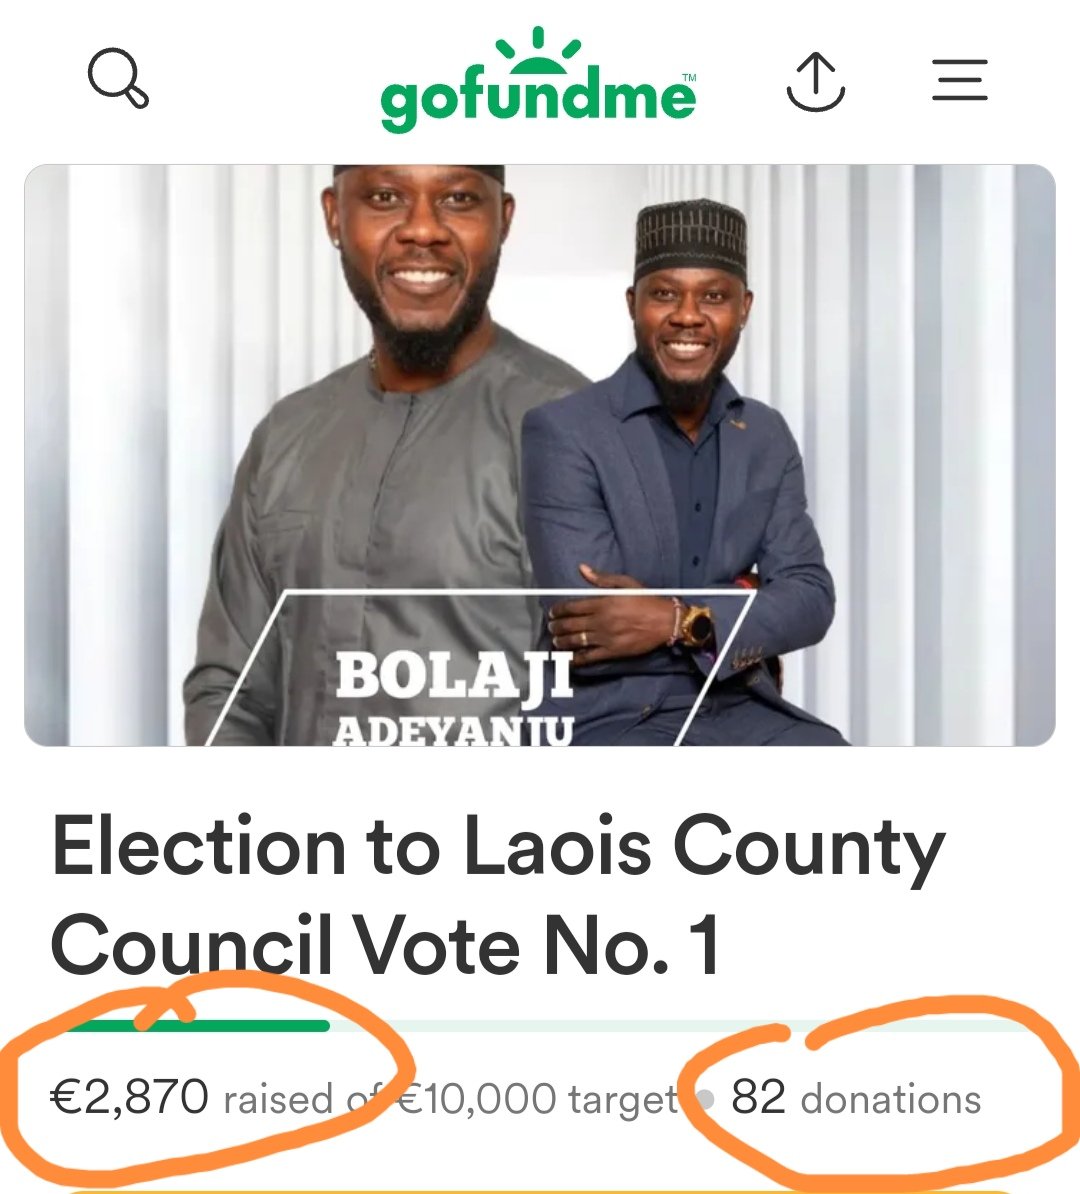 Curious as why one needs €3k & the other needs €10k

My series, on new to the Parish local Election Candidates using #GoFundMe to finance their campaigns.

@TinaMax8 not sure if Cash is biodegradable 🤭